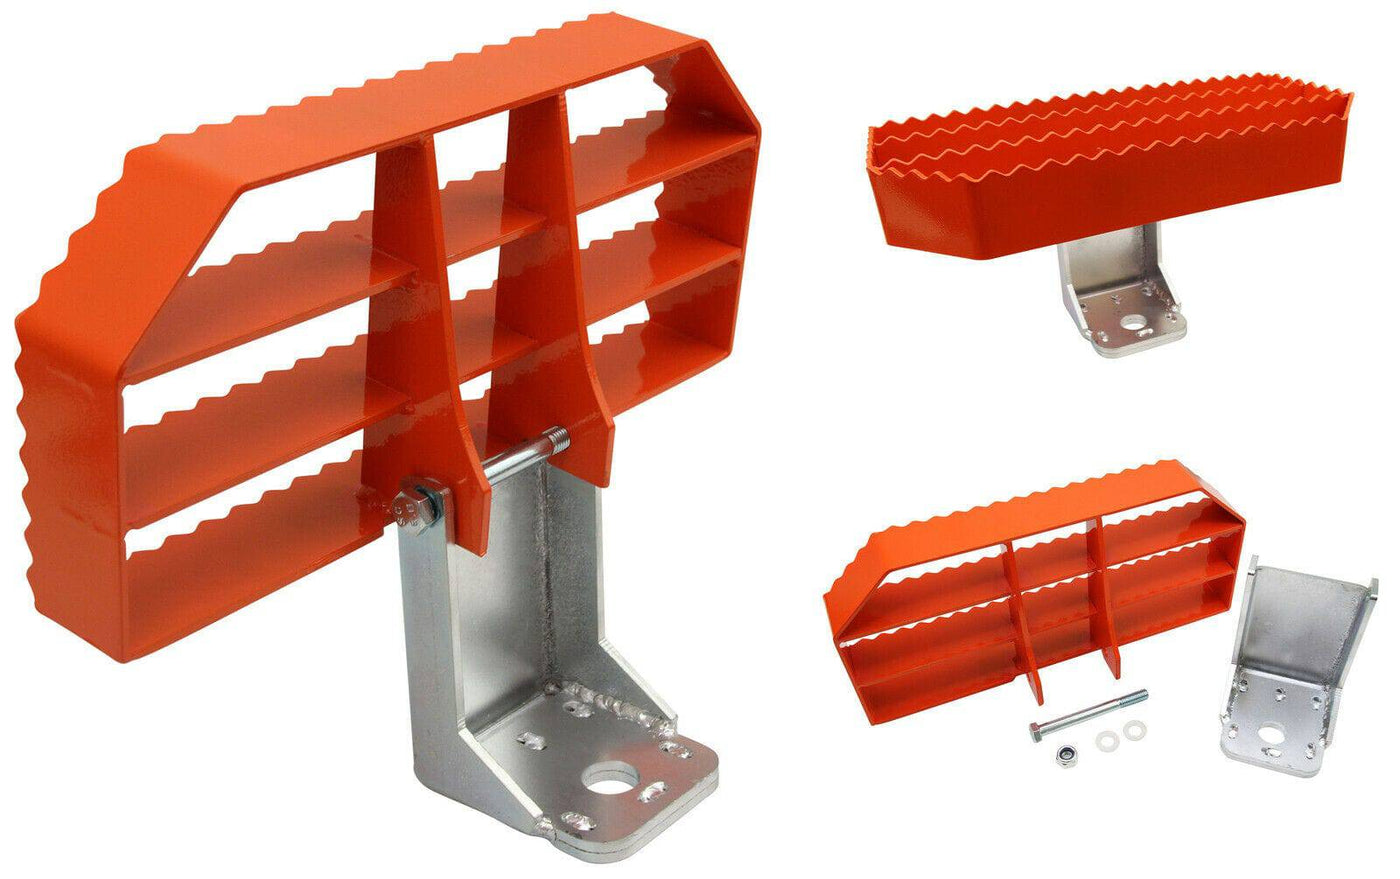 Orange Folding Tow Bar Step Up 4X4 (Online Only)